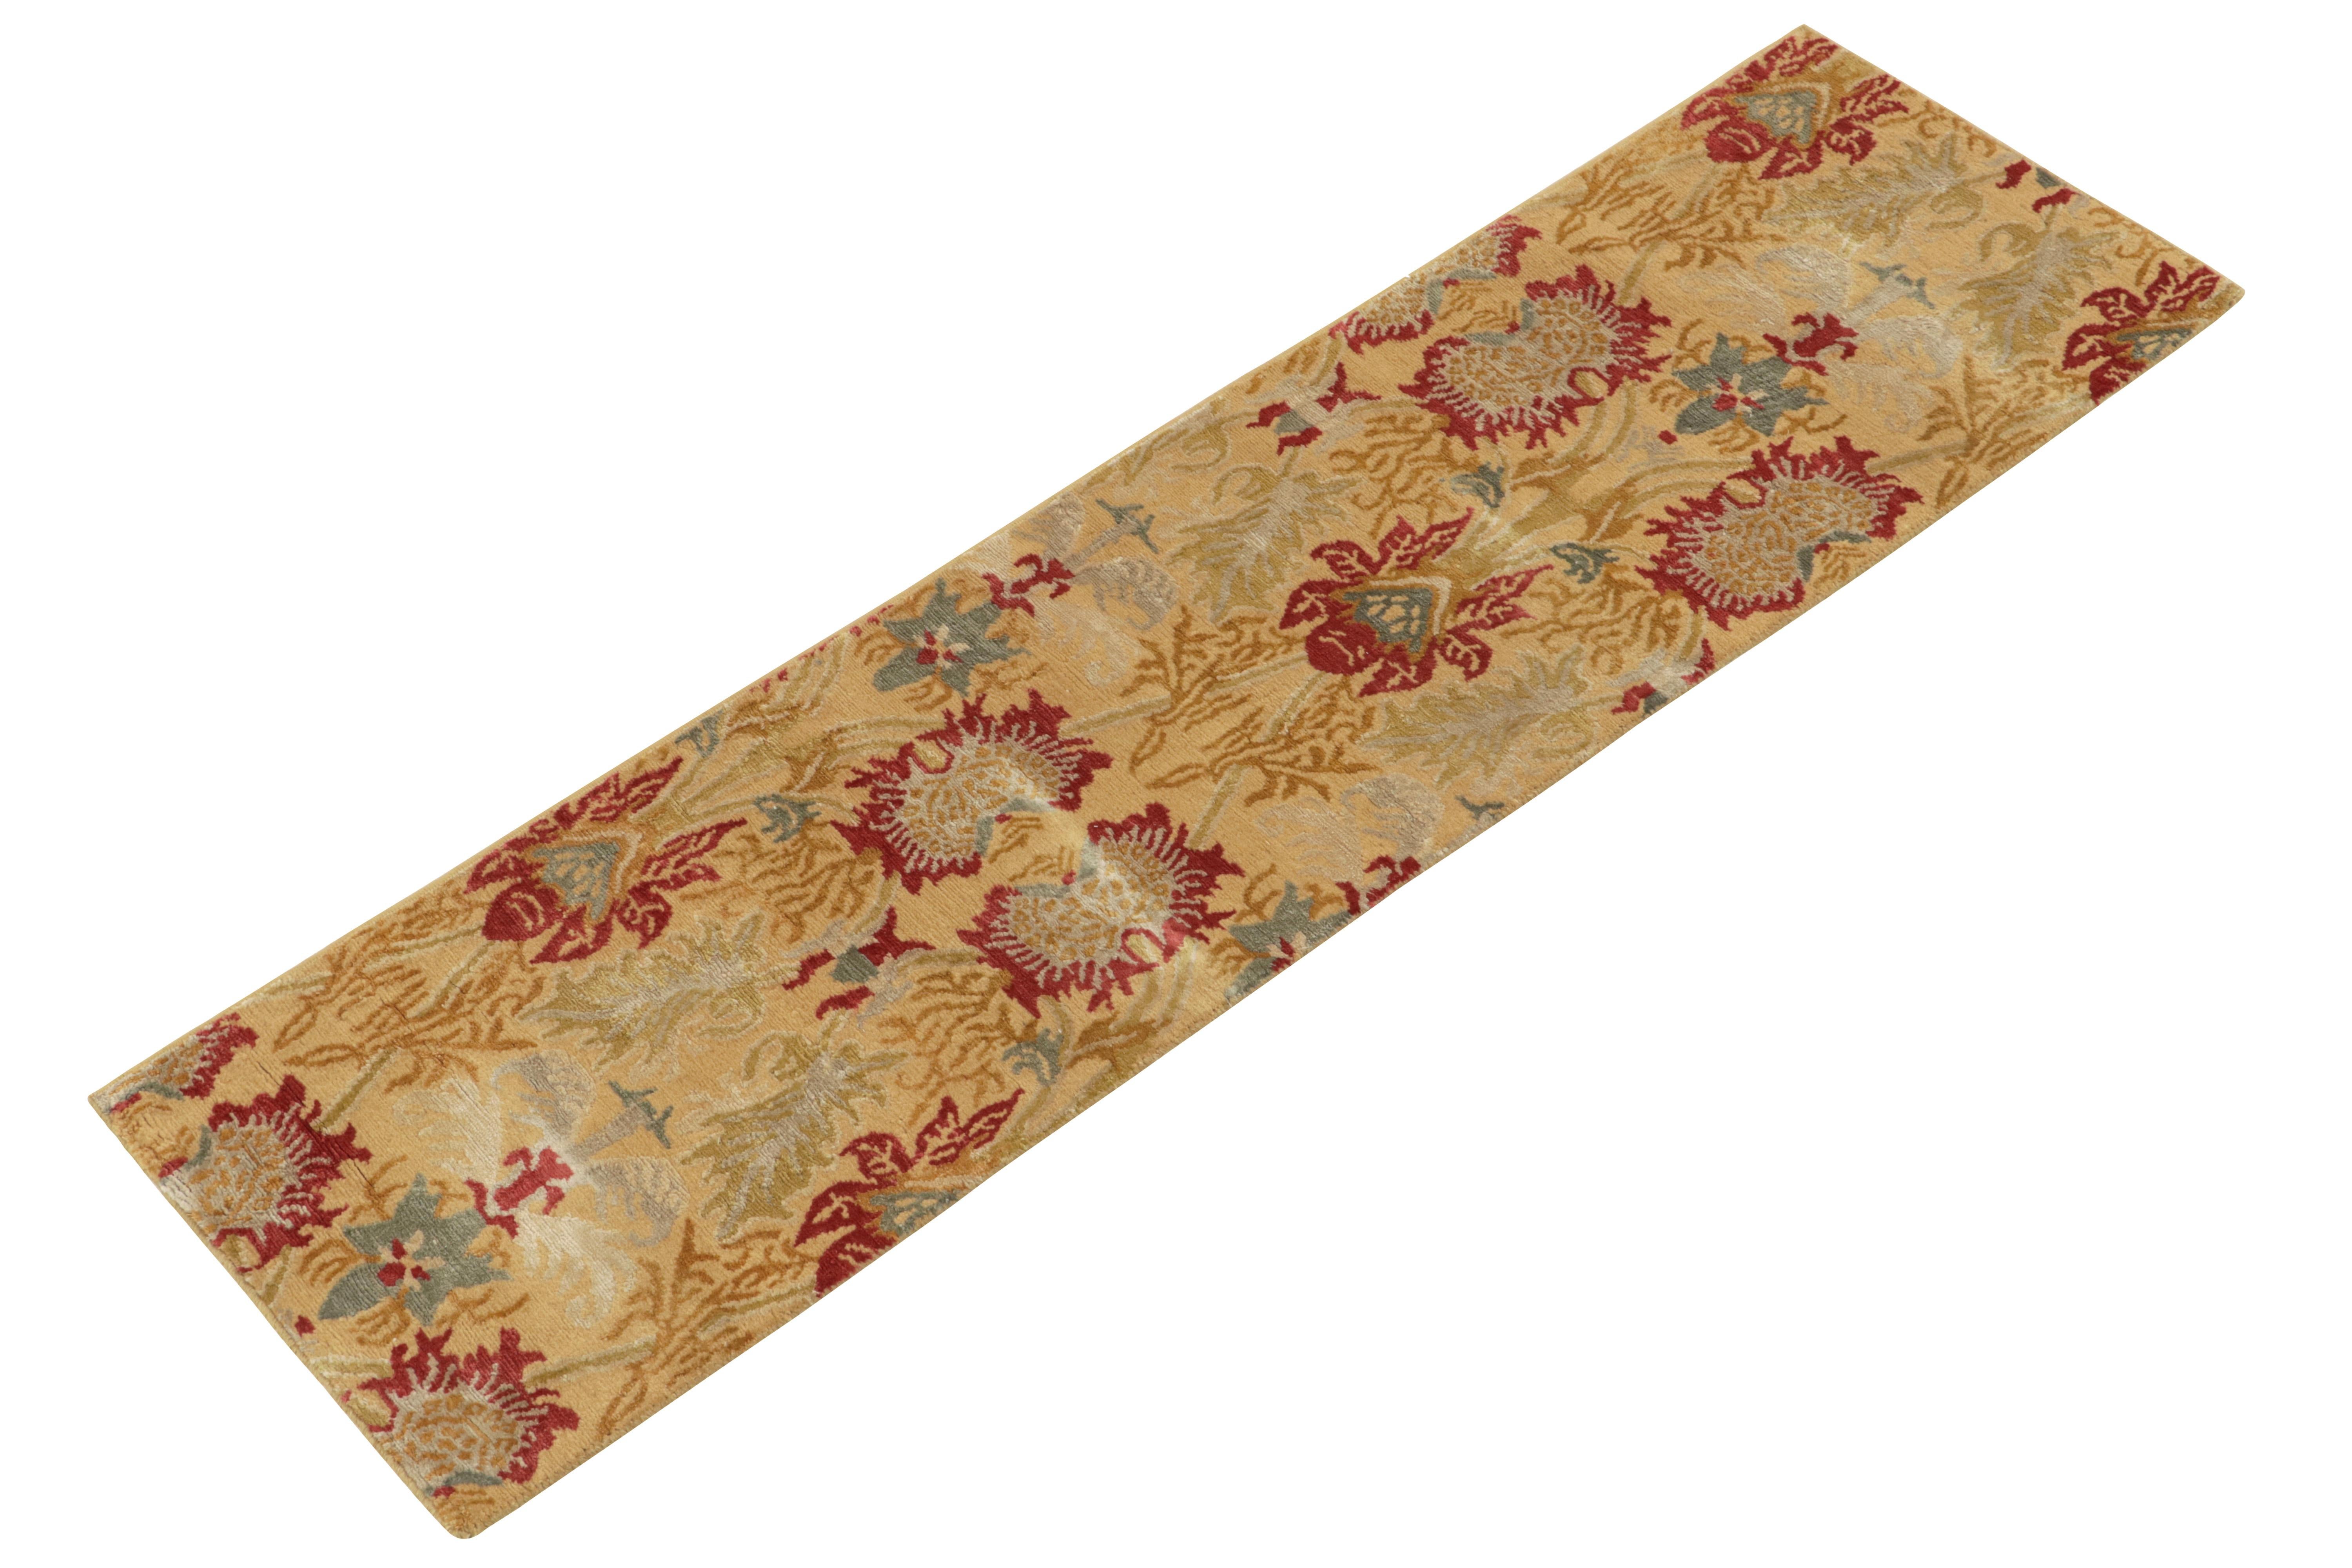 Nepalese Rug & Kilim's Spanish European Style Runner in Gold, Red & Blue Floral Pattern For Sale